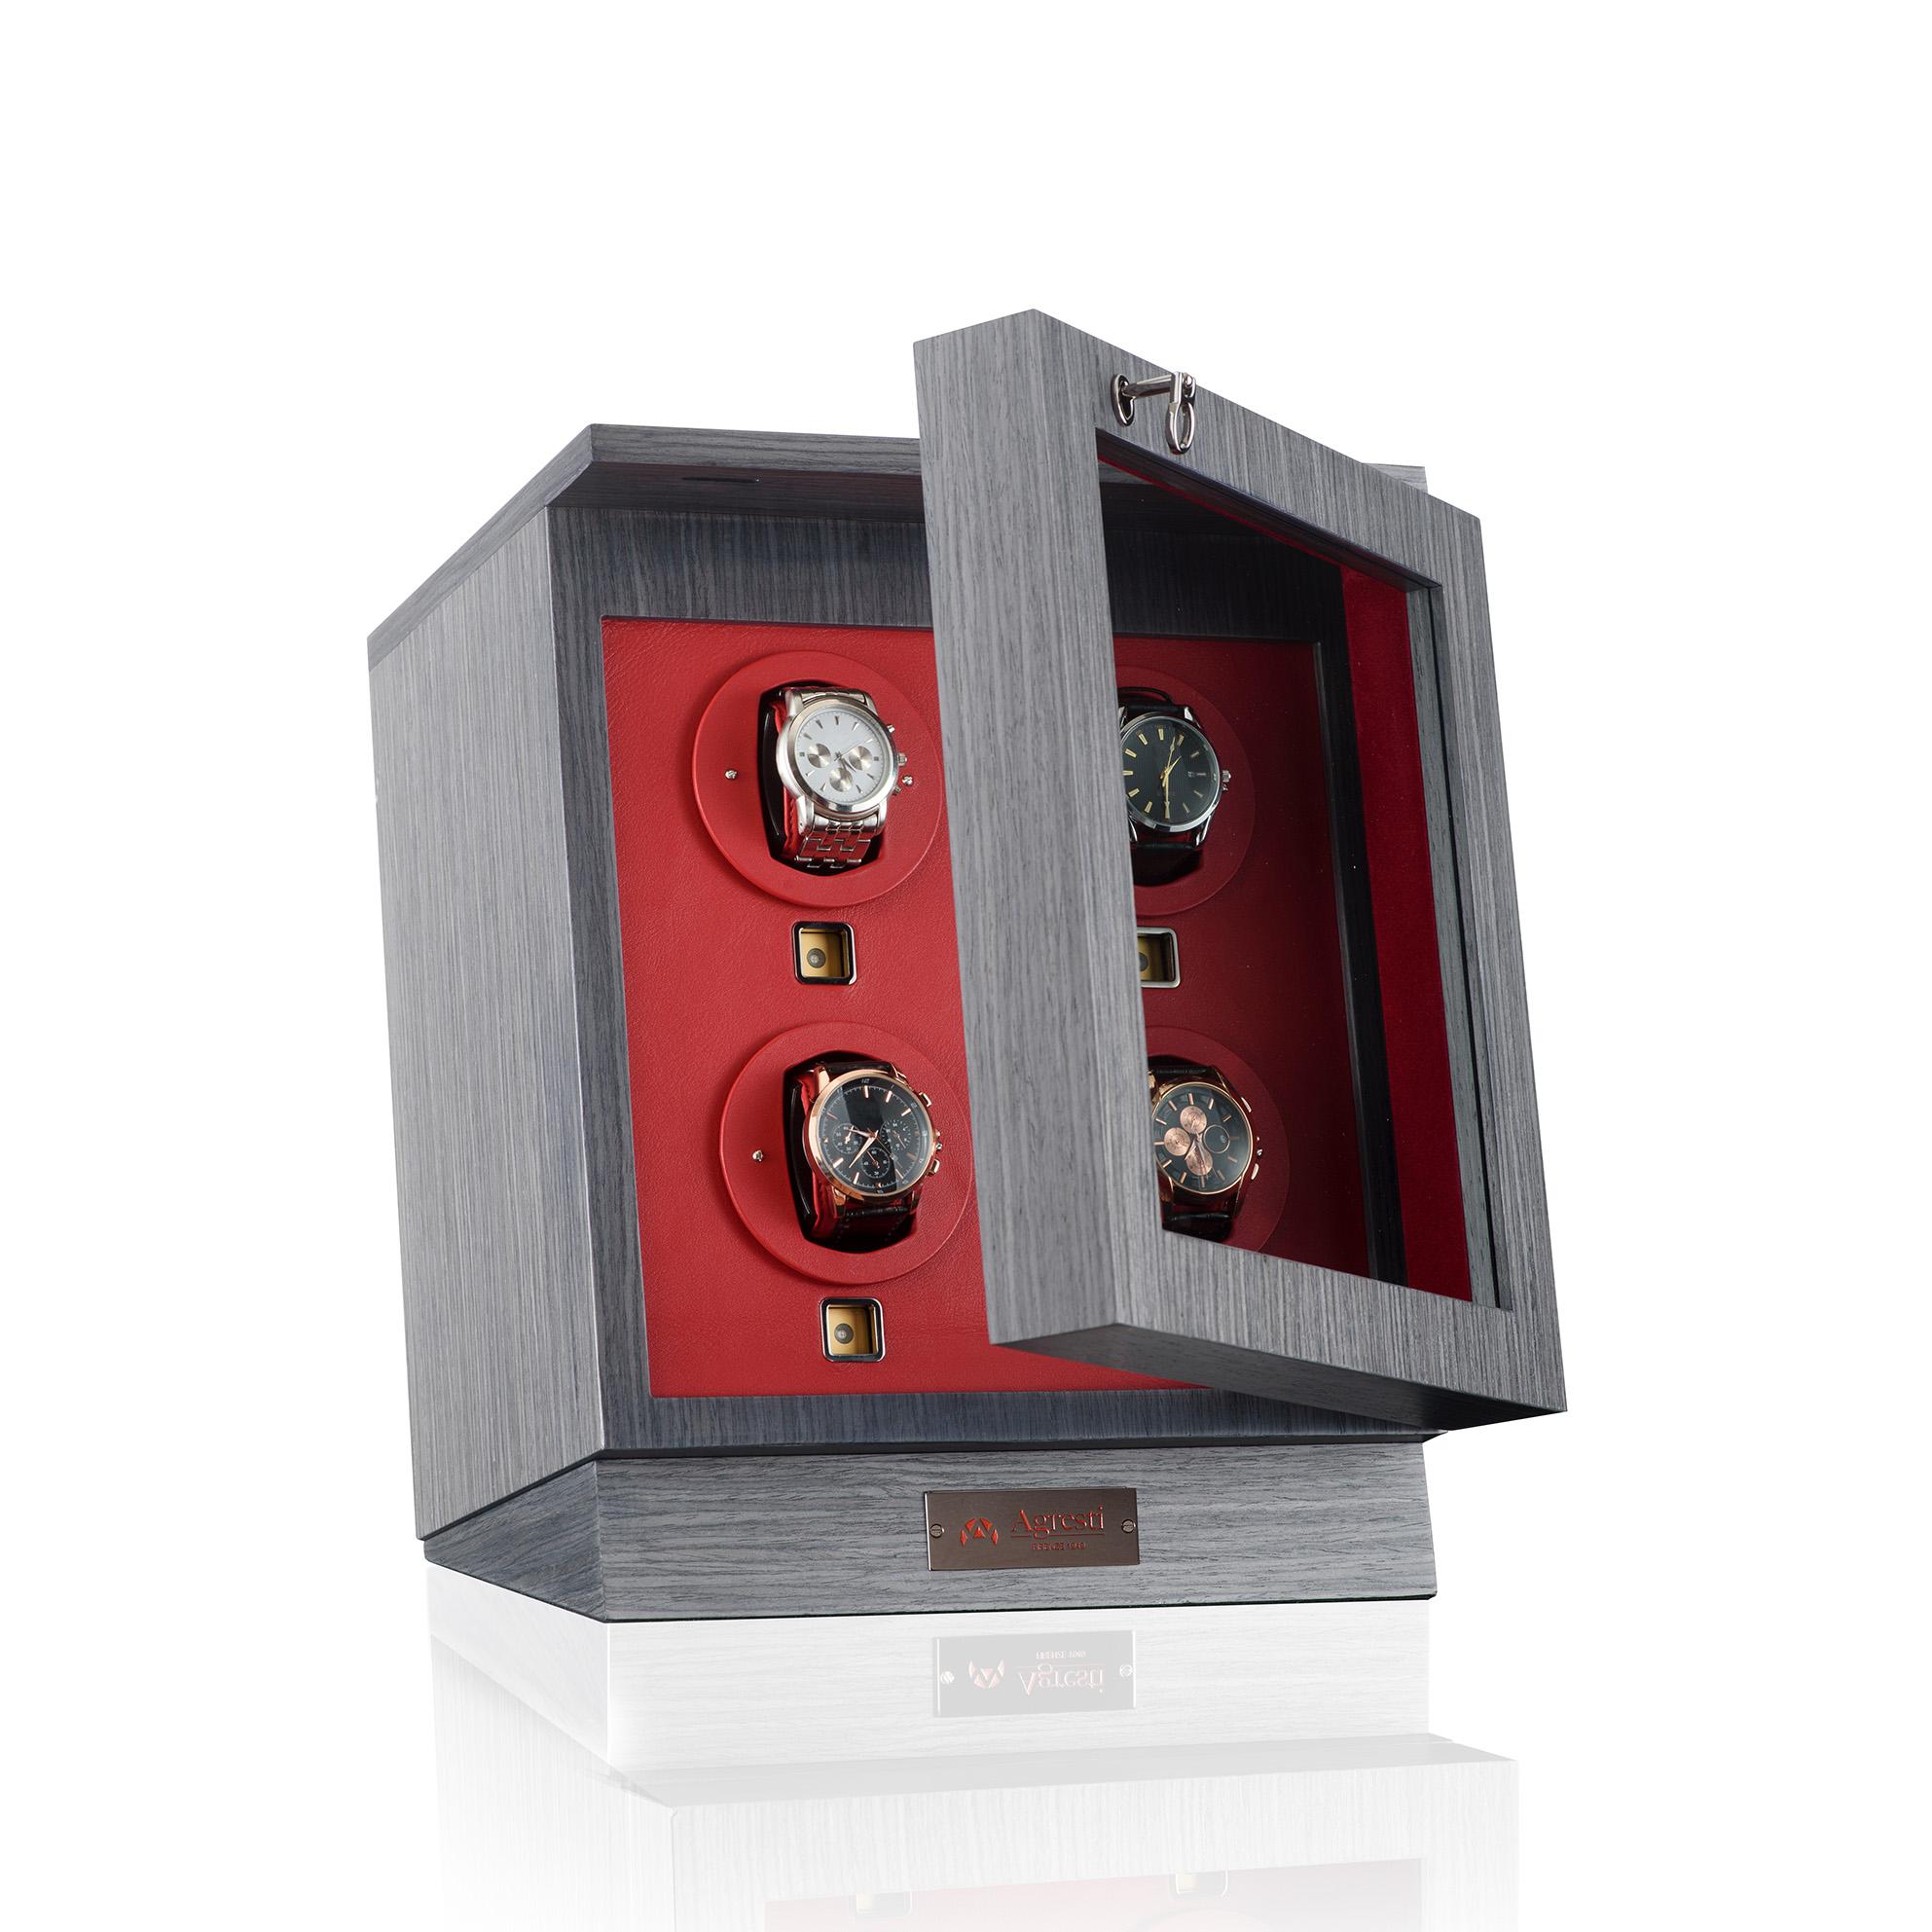 Case in smoked grey oak with four Swiss-made winders, red leather lining, touch switch, glass display window.
Brass accessories with ruthenium finish.

 